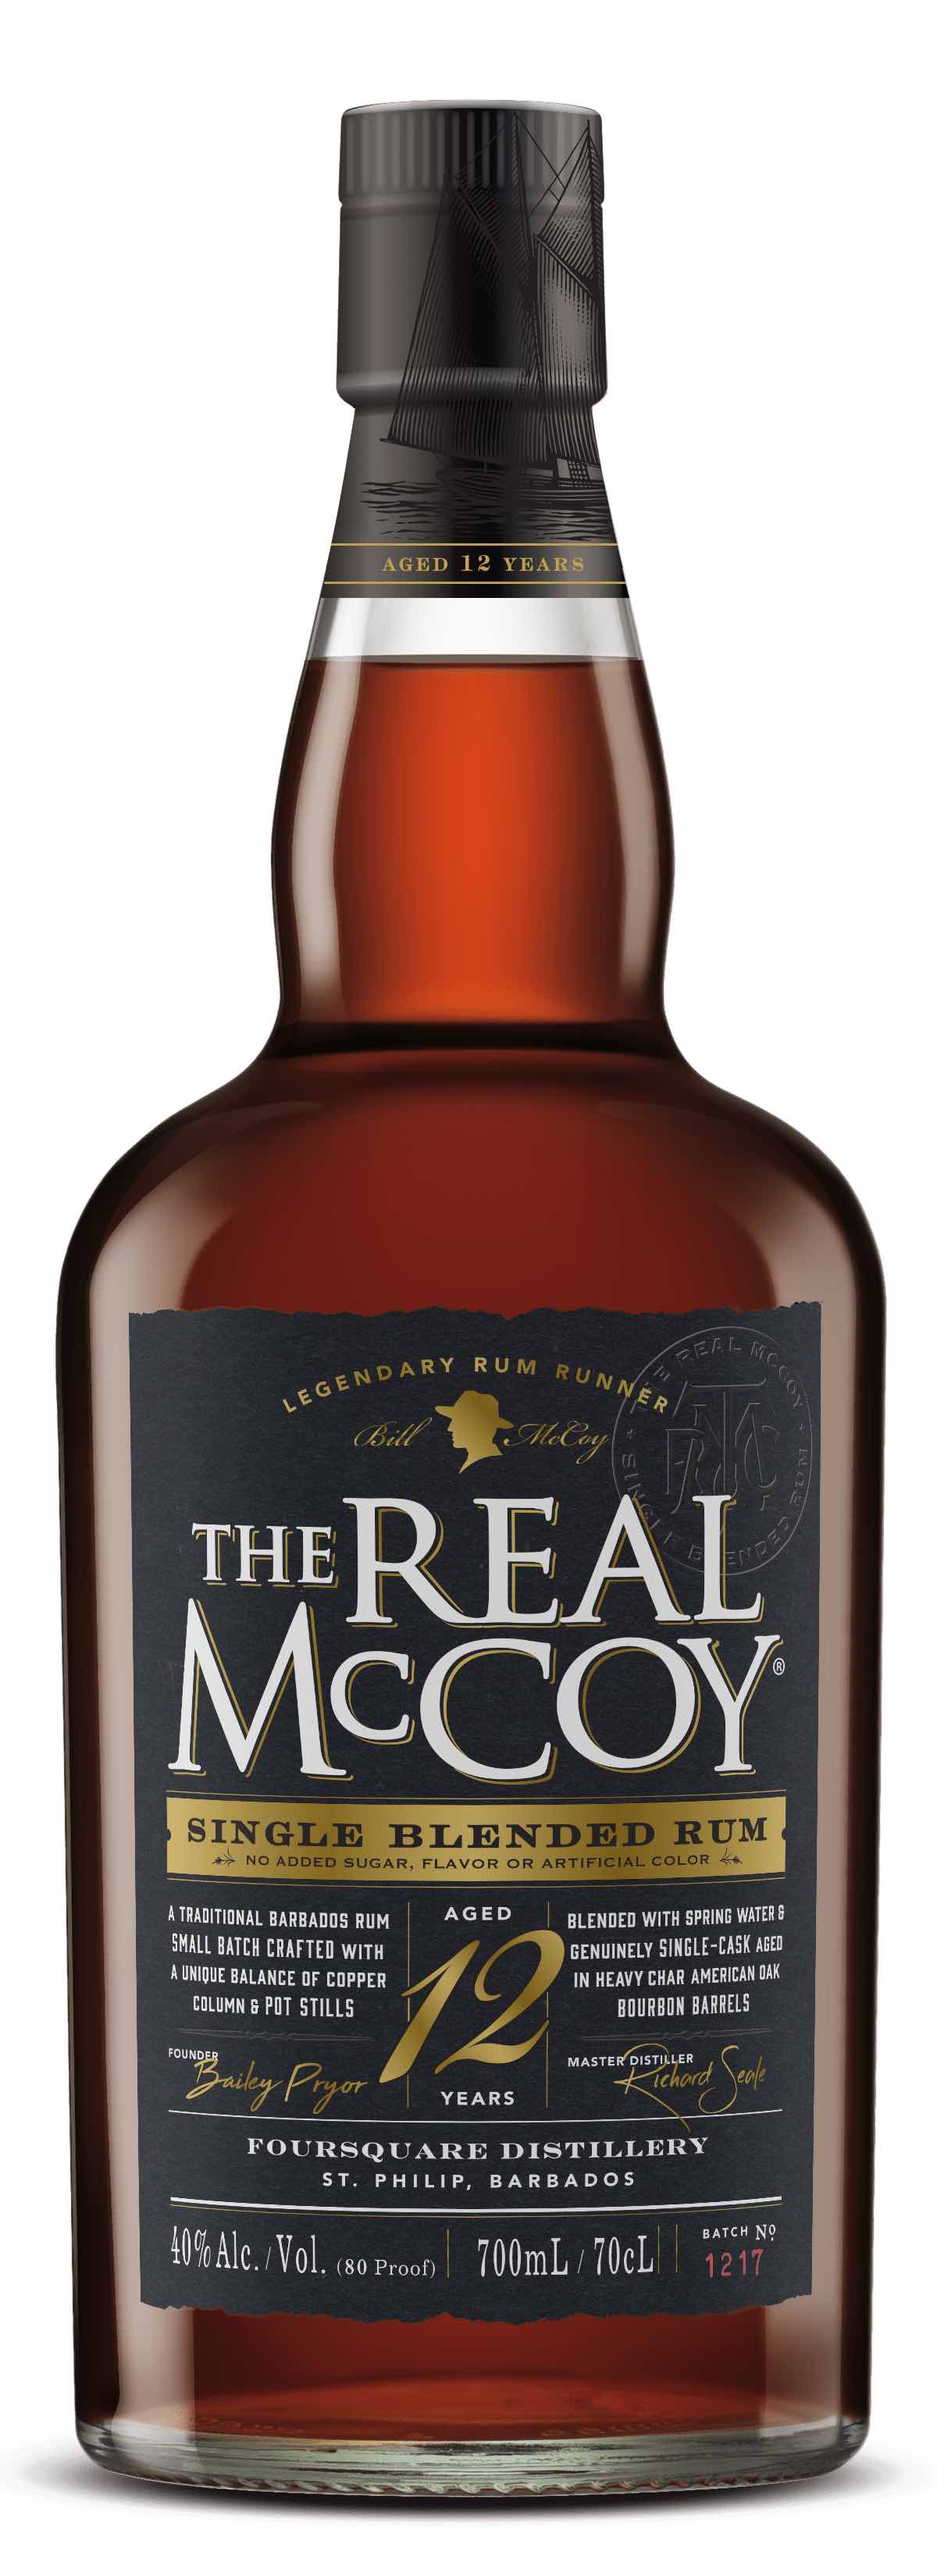 The Real McCoy Single Blended Rum 12 years